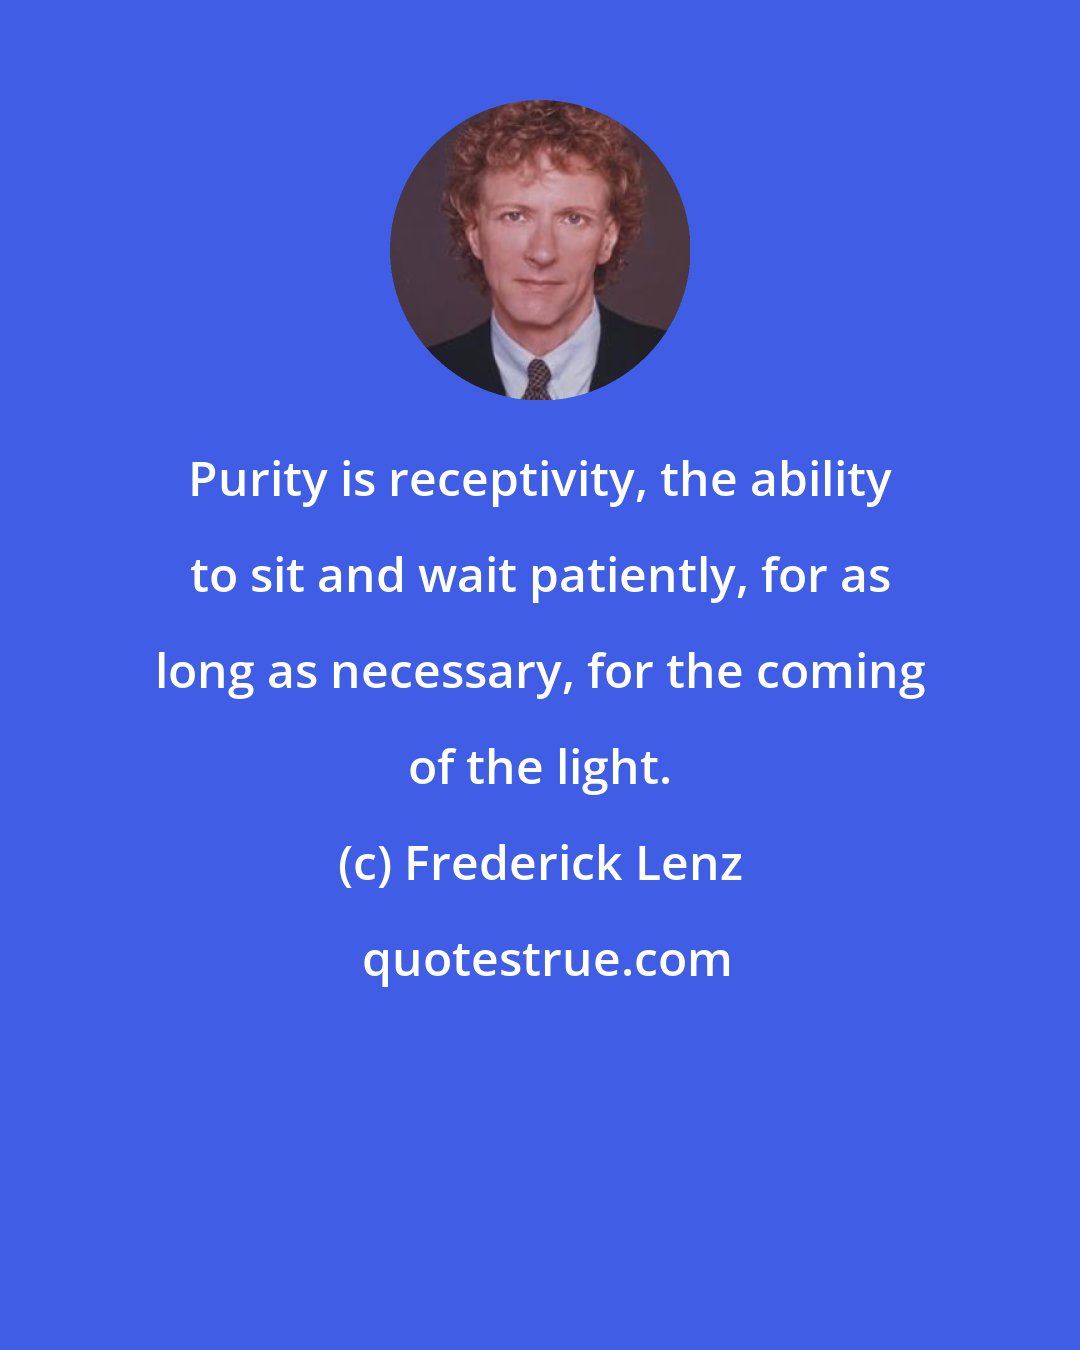 Frederick Lenz: Purity is receptivity, the ability to sit and wait patiently, for as long as necessary, for the coming of the light.